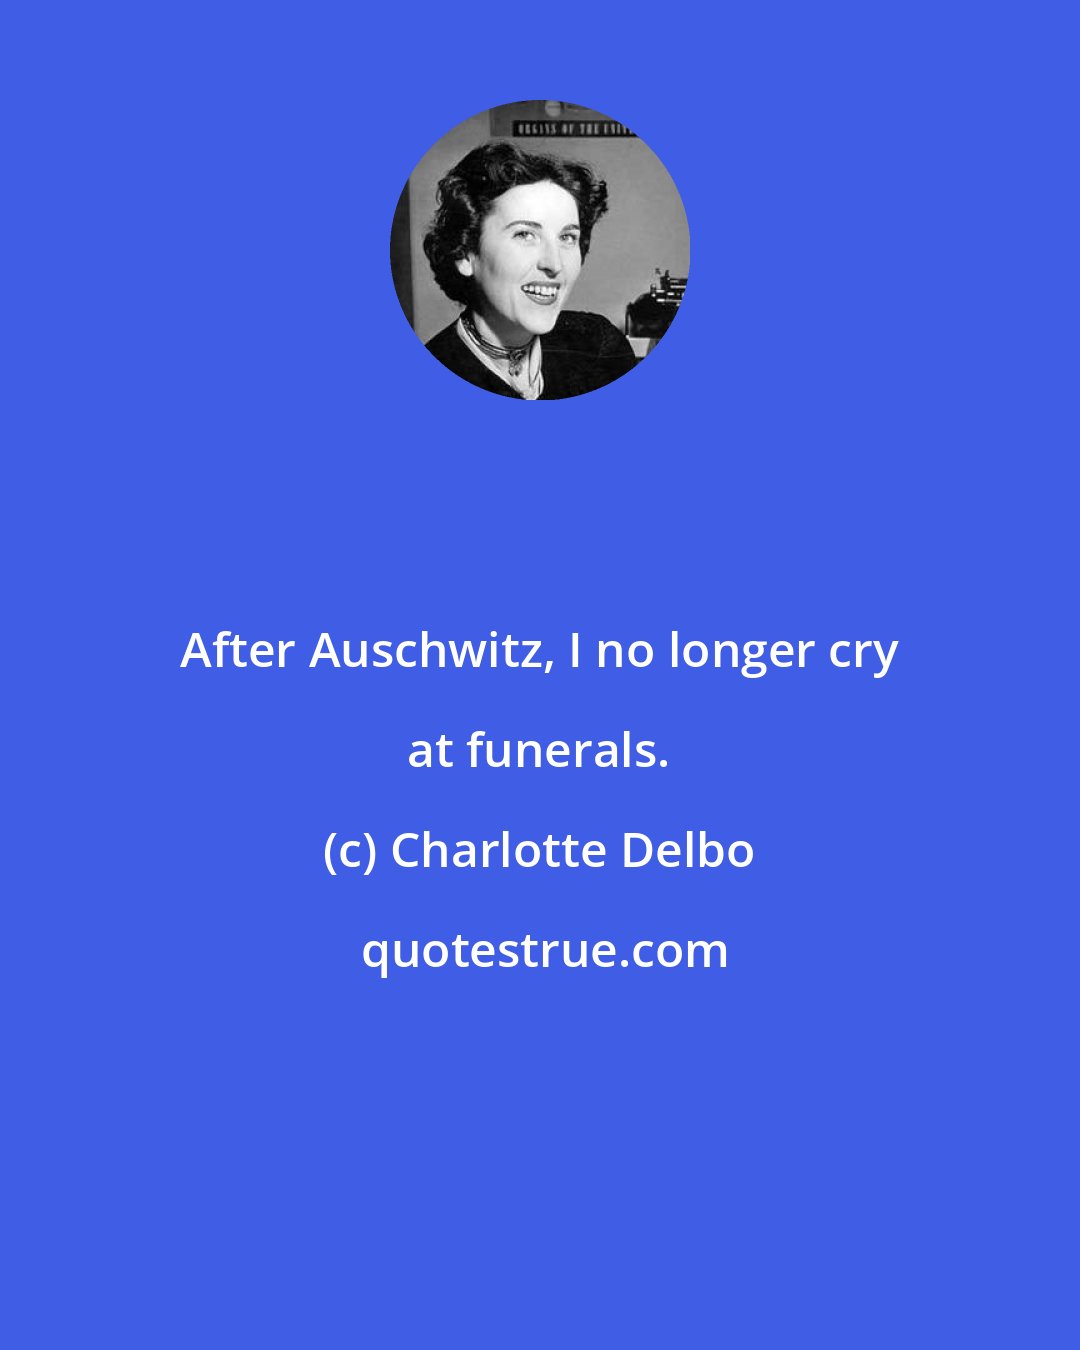 Charlotte Delbo: After Auschwitz, I no longer cry at funerals.